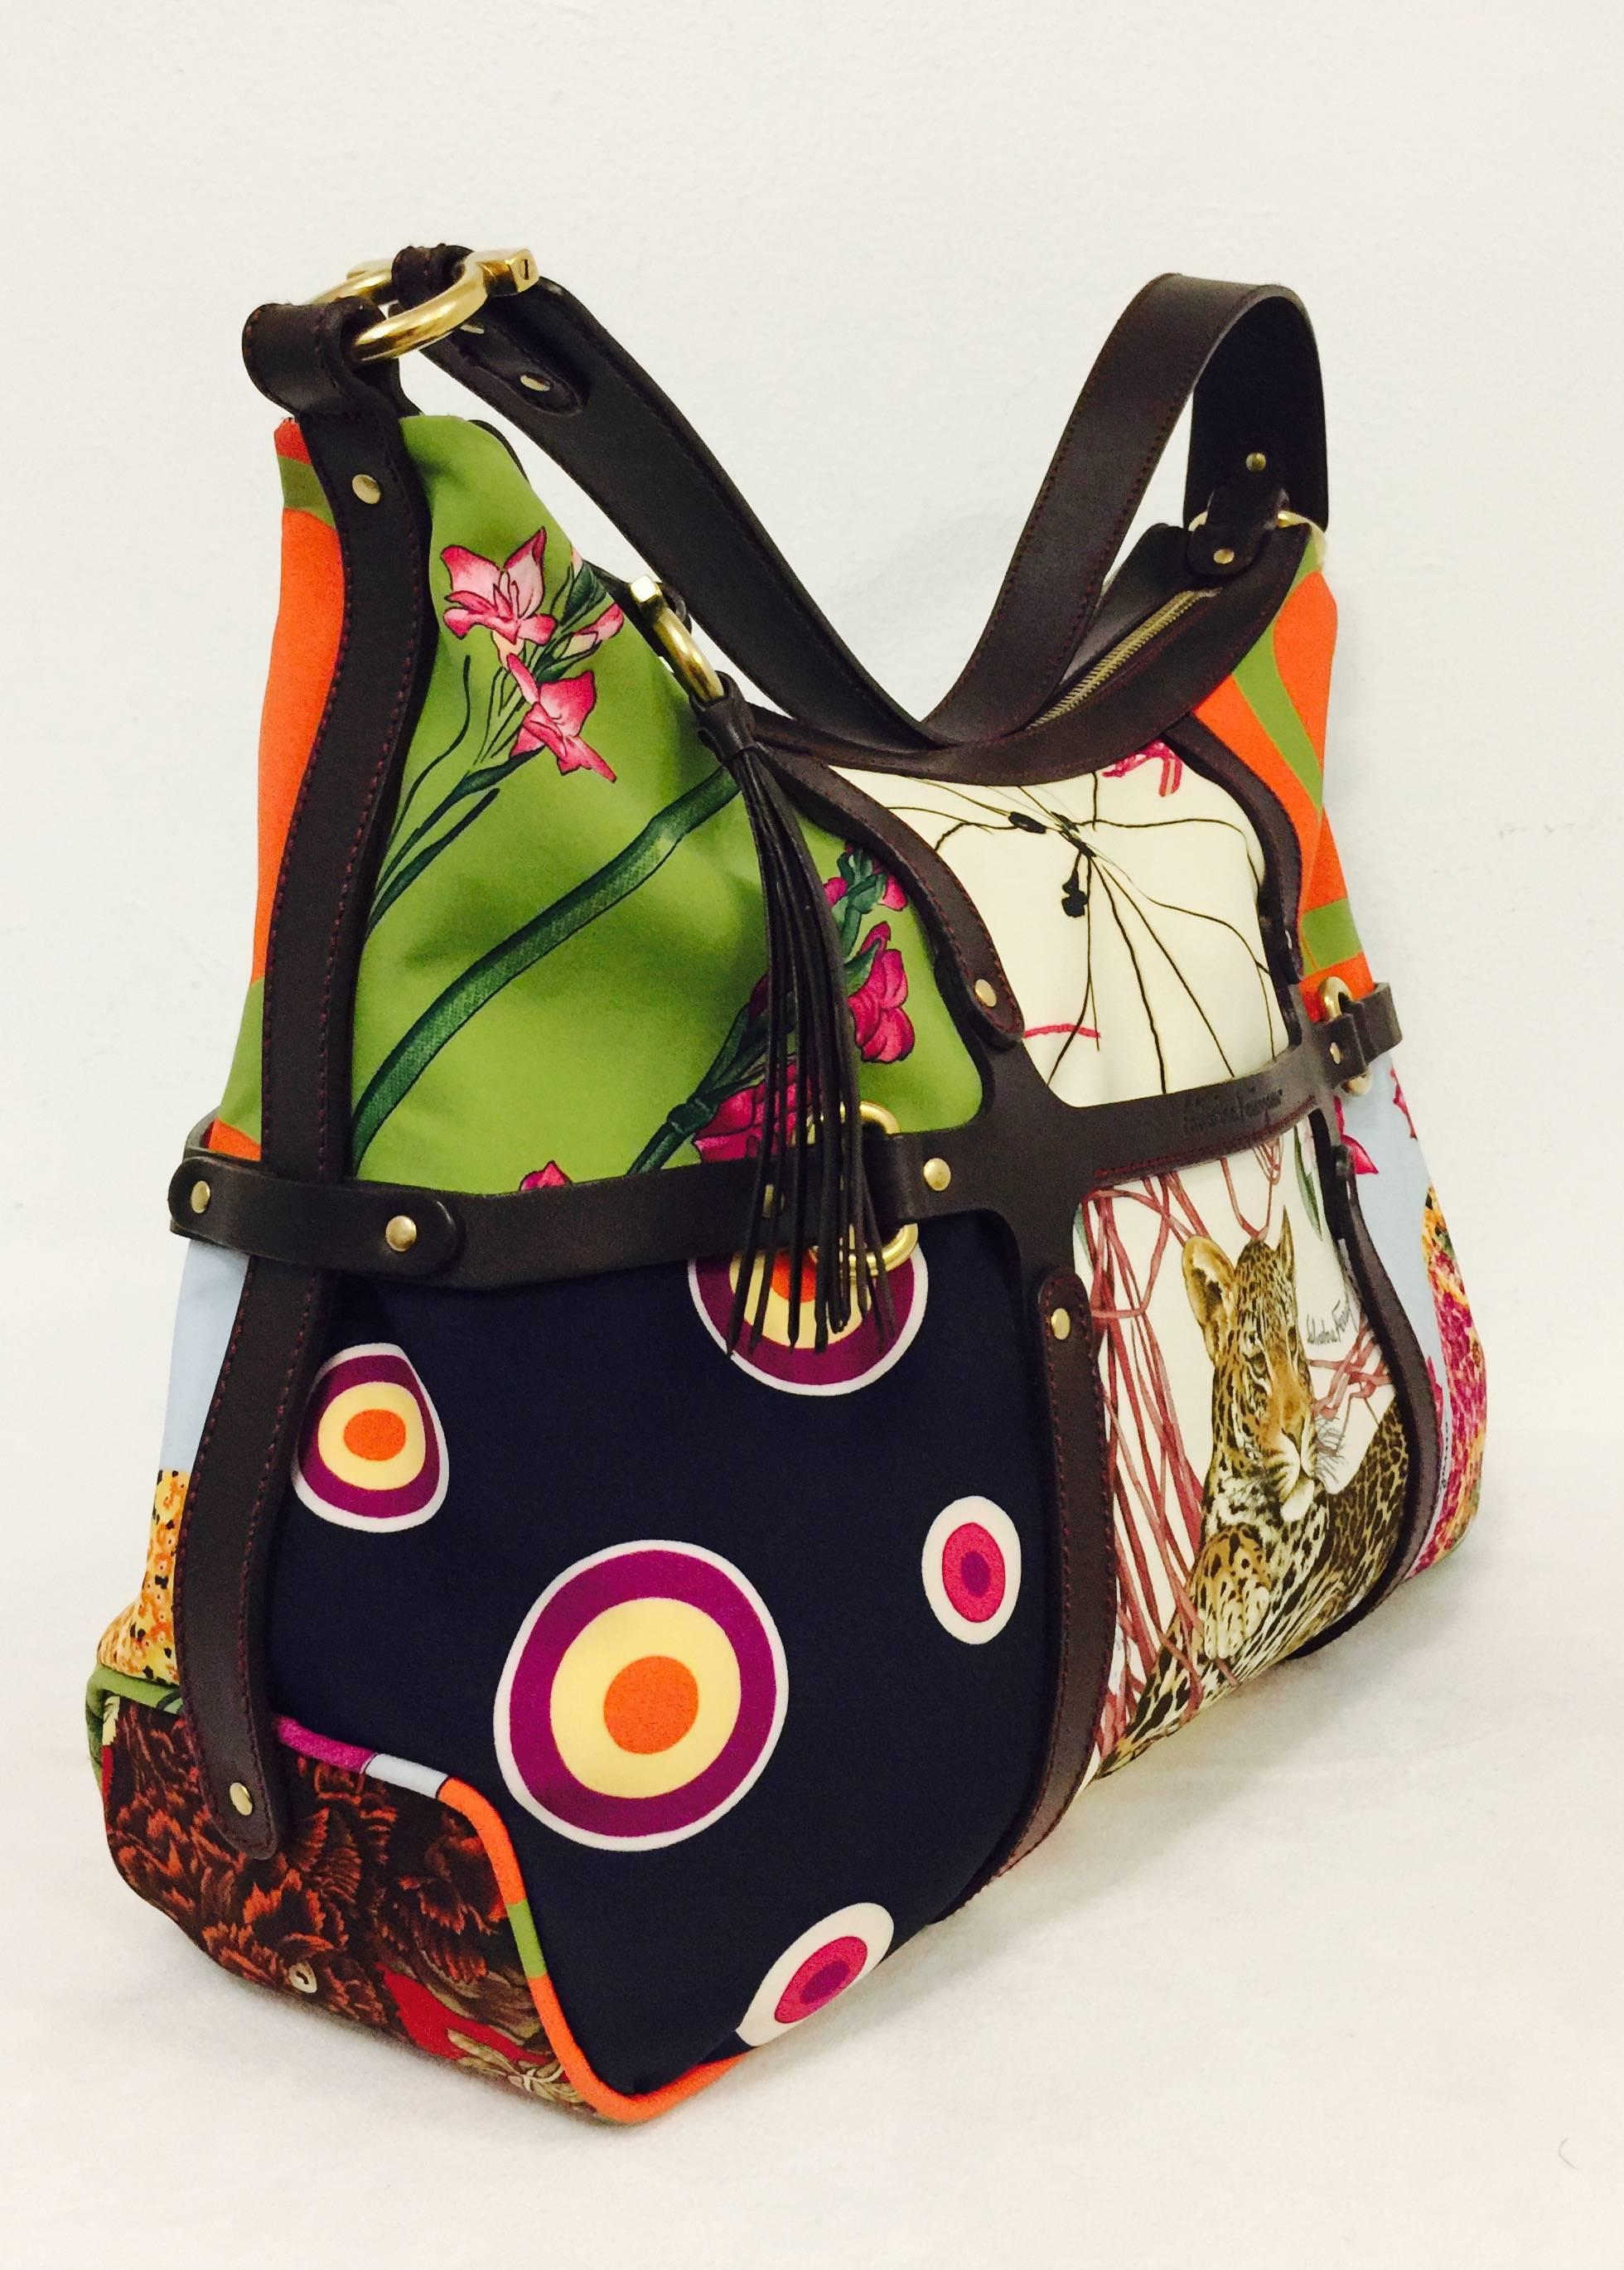 Salvatore Ferragamo Fiera Print Shoulder Bag is highly desired by connoisseurs of all things Ferragamo!  Featuring multicolor 